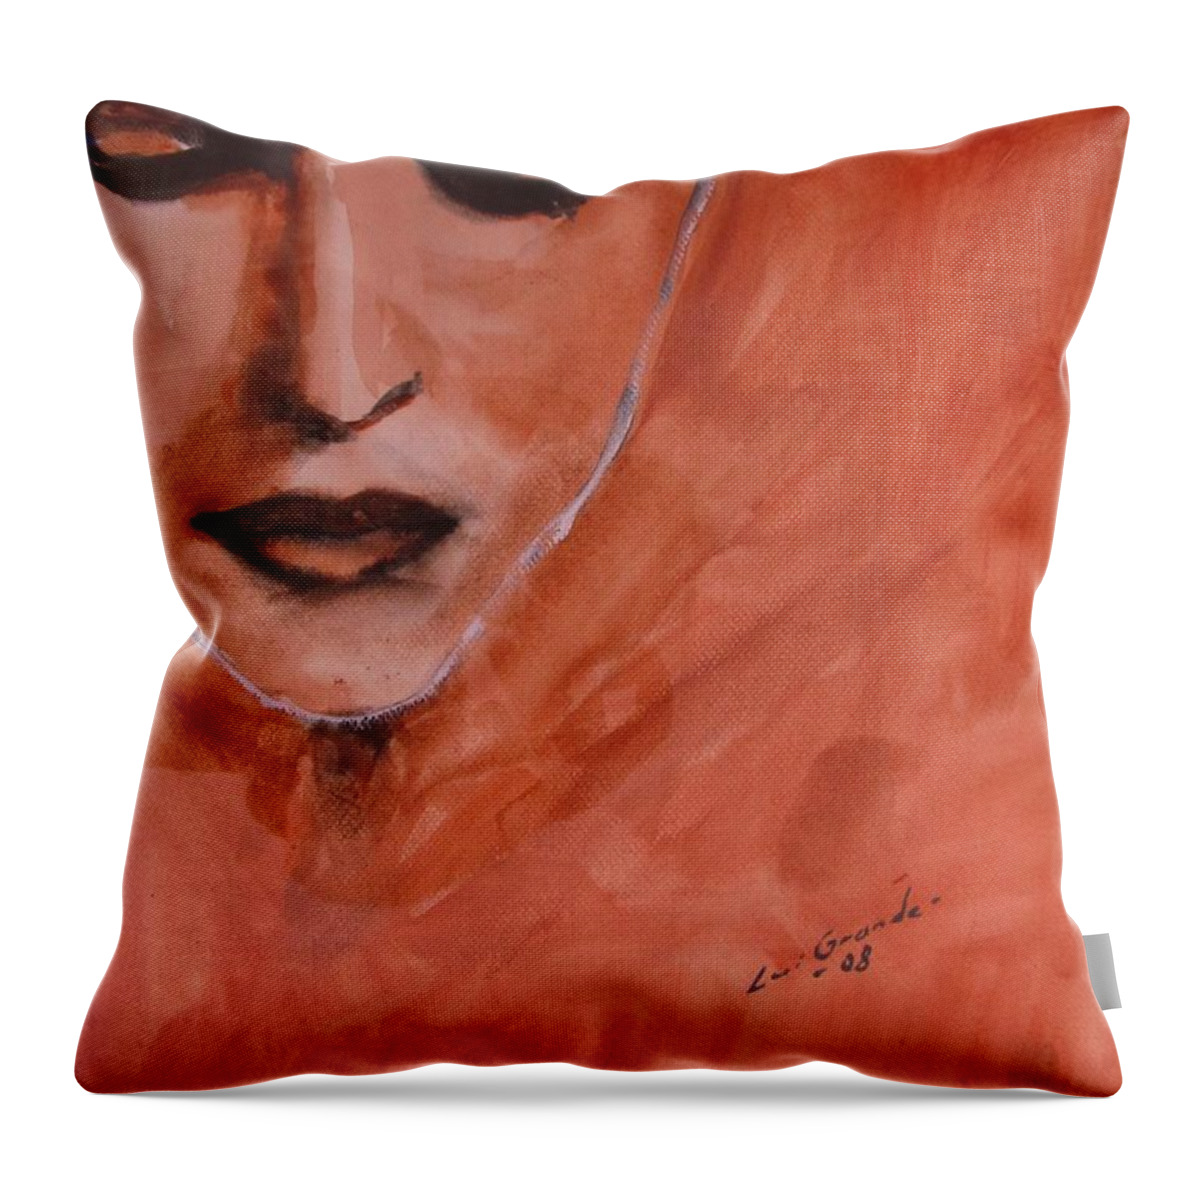 Portrait Throw Pillow featuring the painting Looking To Her Soul by Jarmo Korhonen aka Jarko